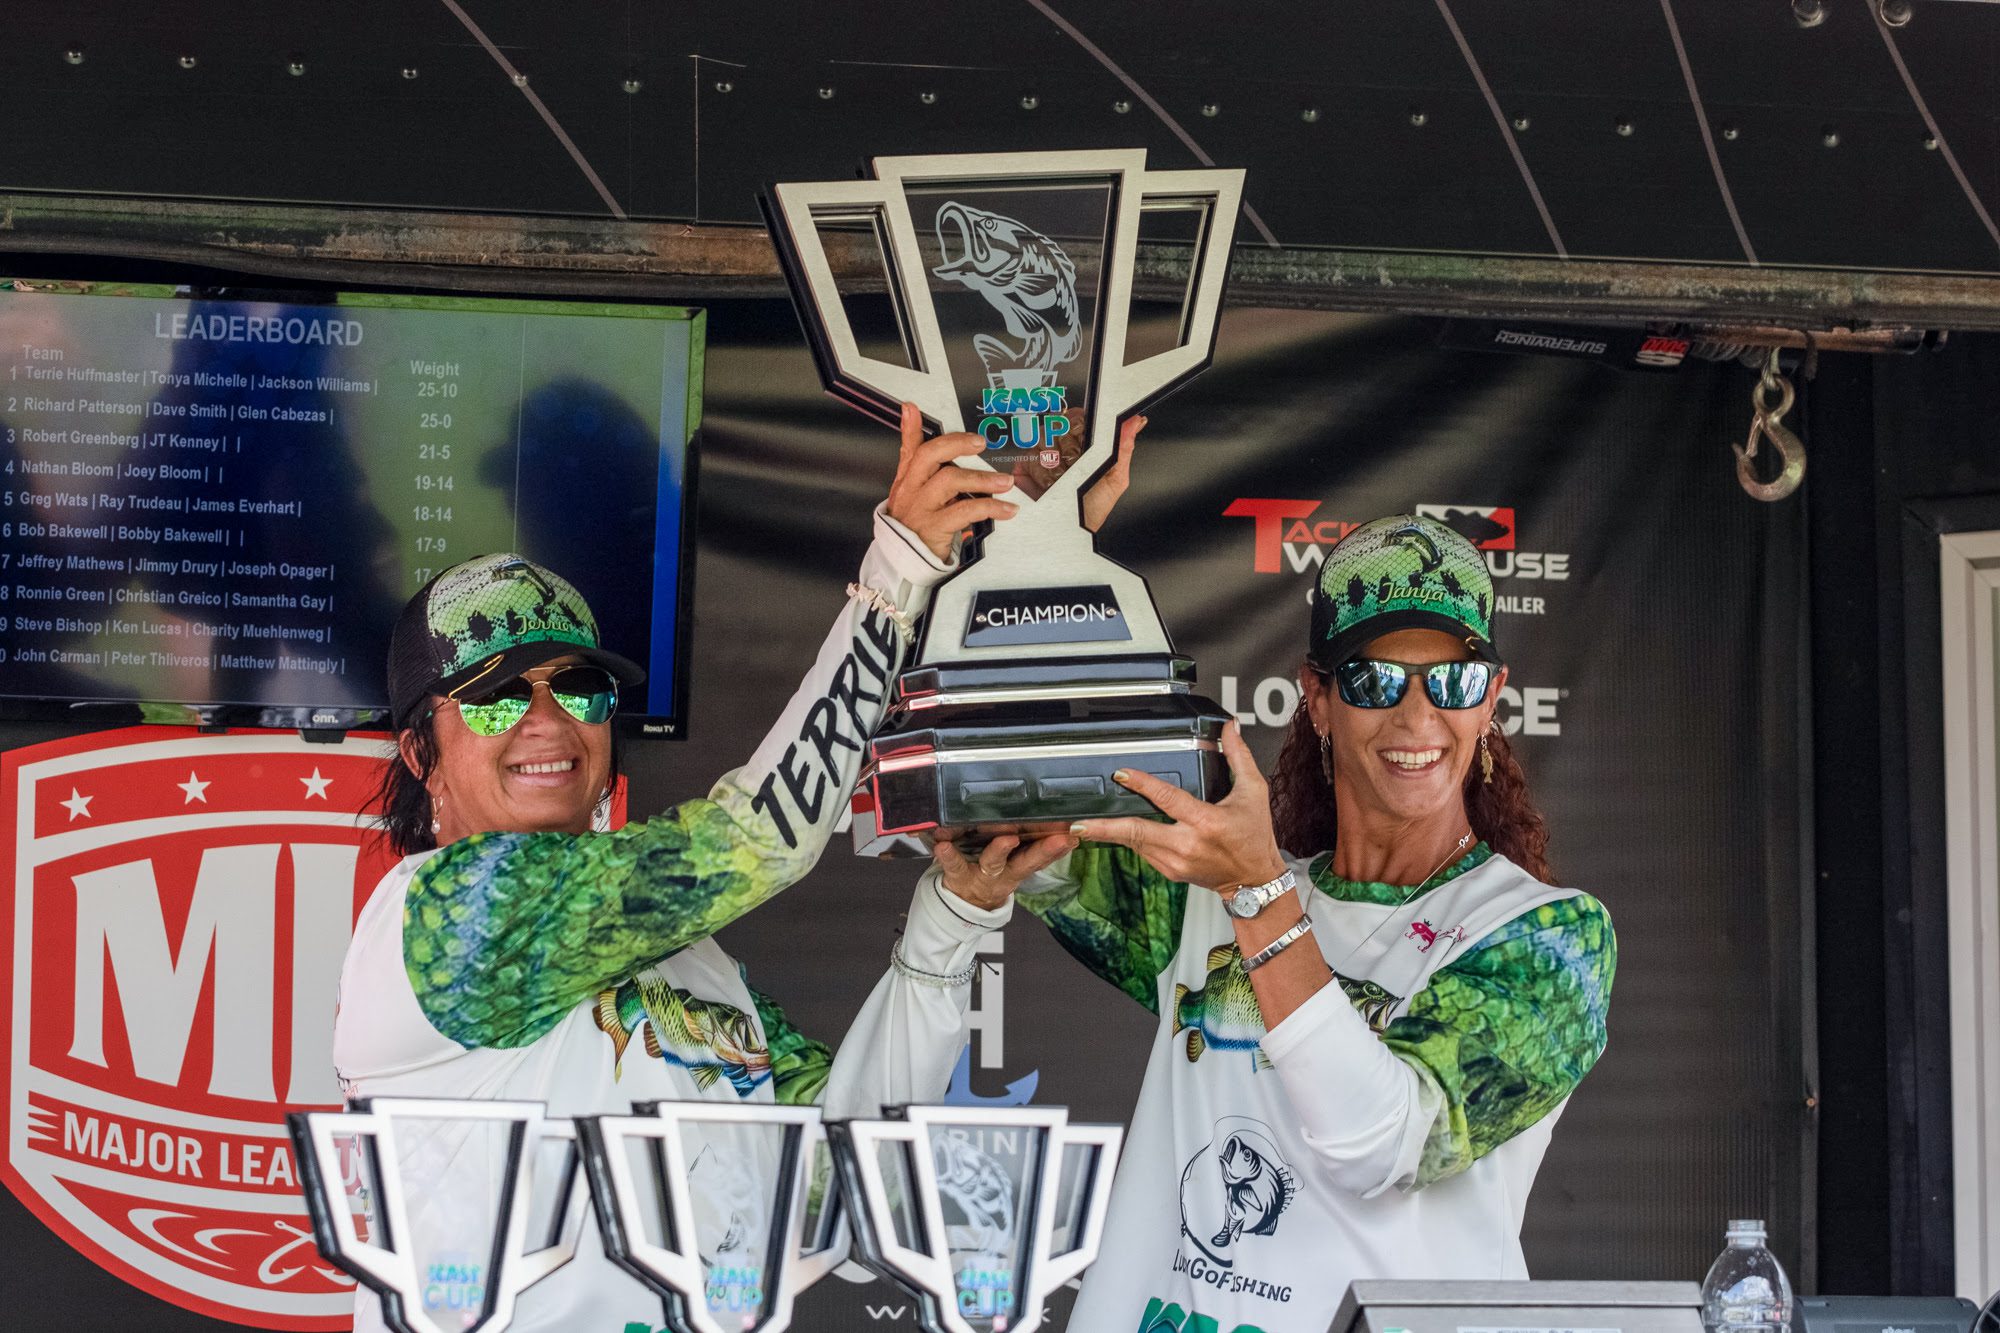 Lucky Go Fishing/Fish Bites Win Seventh-Annual ICAST Cup Presented by Major League Fishing on Lake Toho